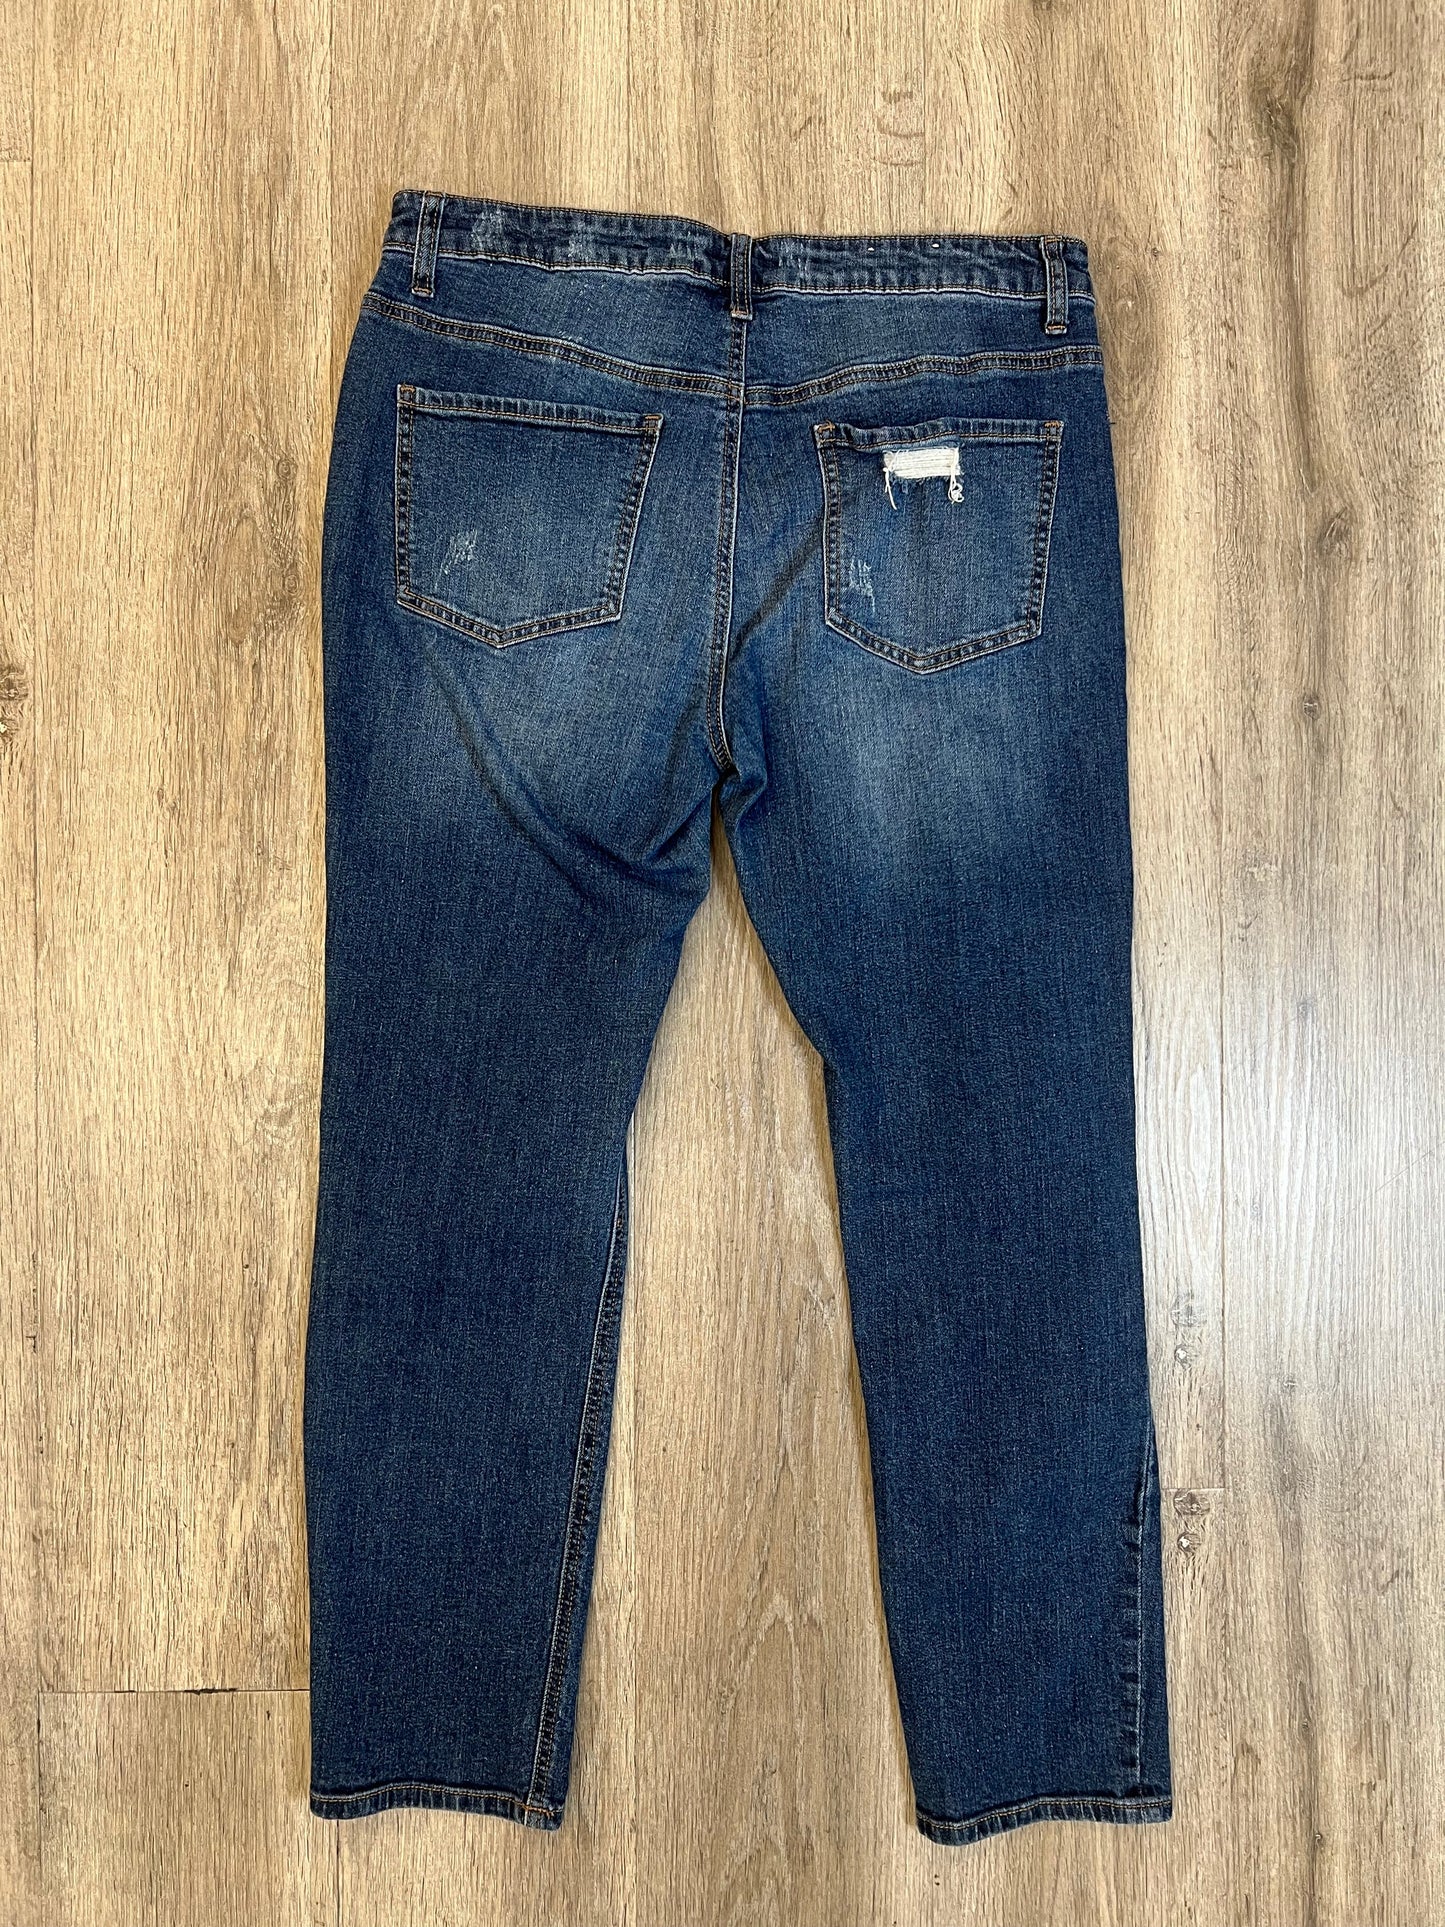 Jeans Straight By Altard State  Size: 29